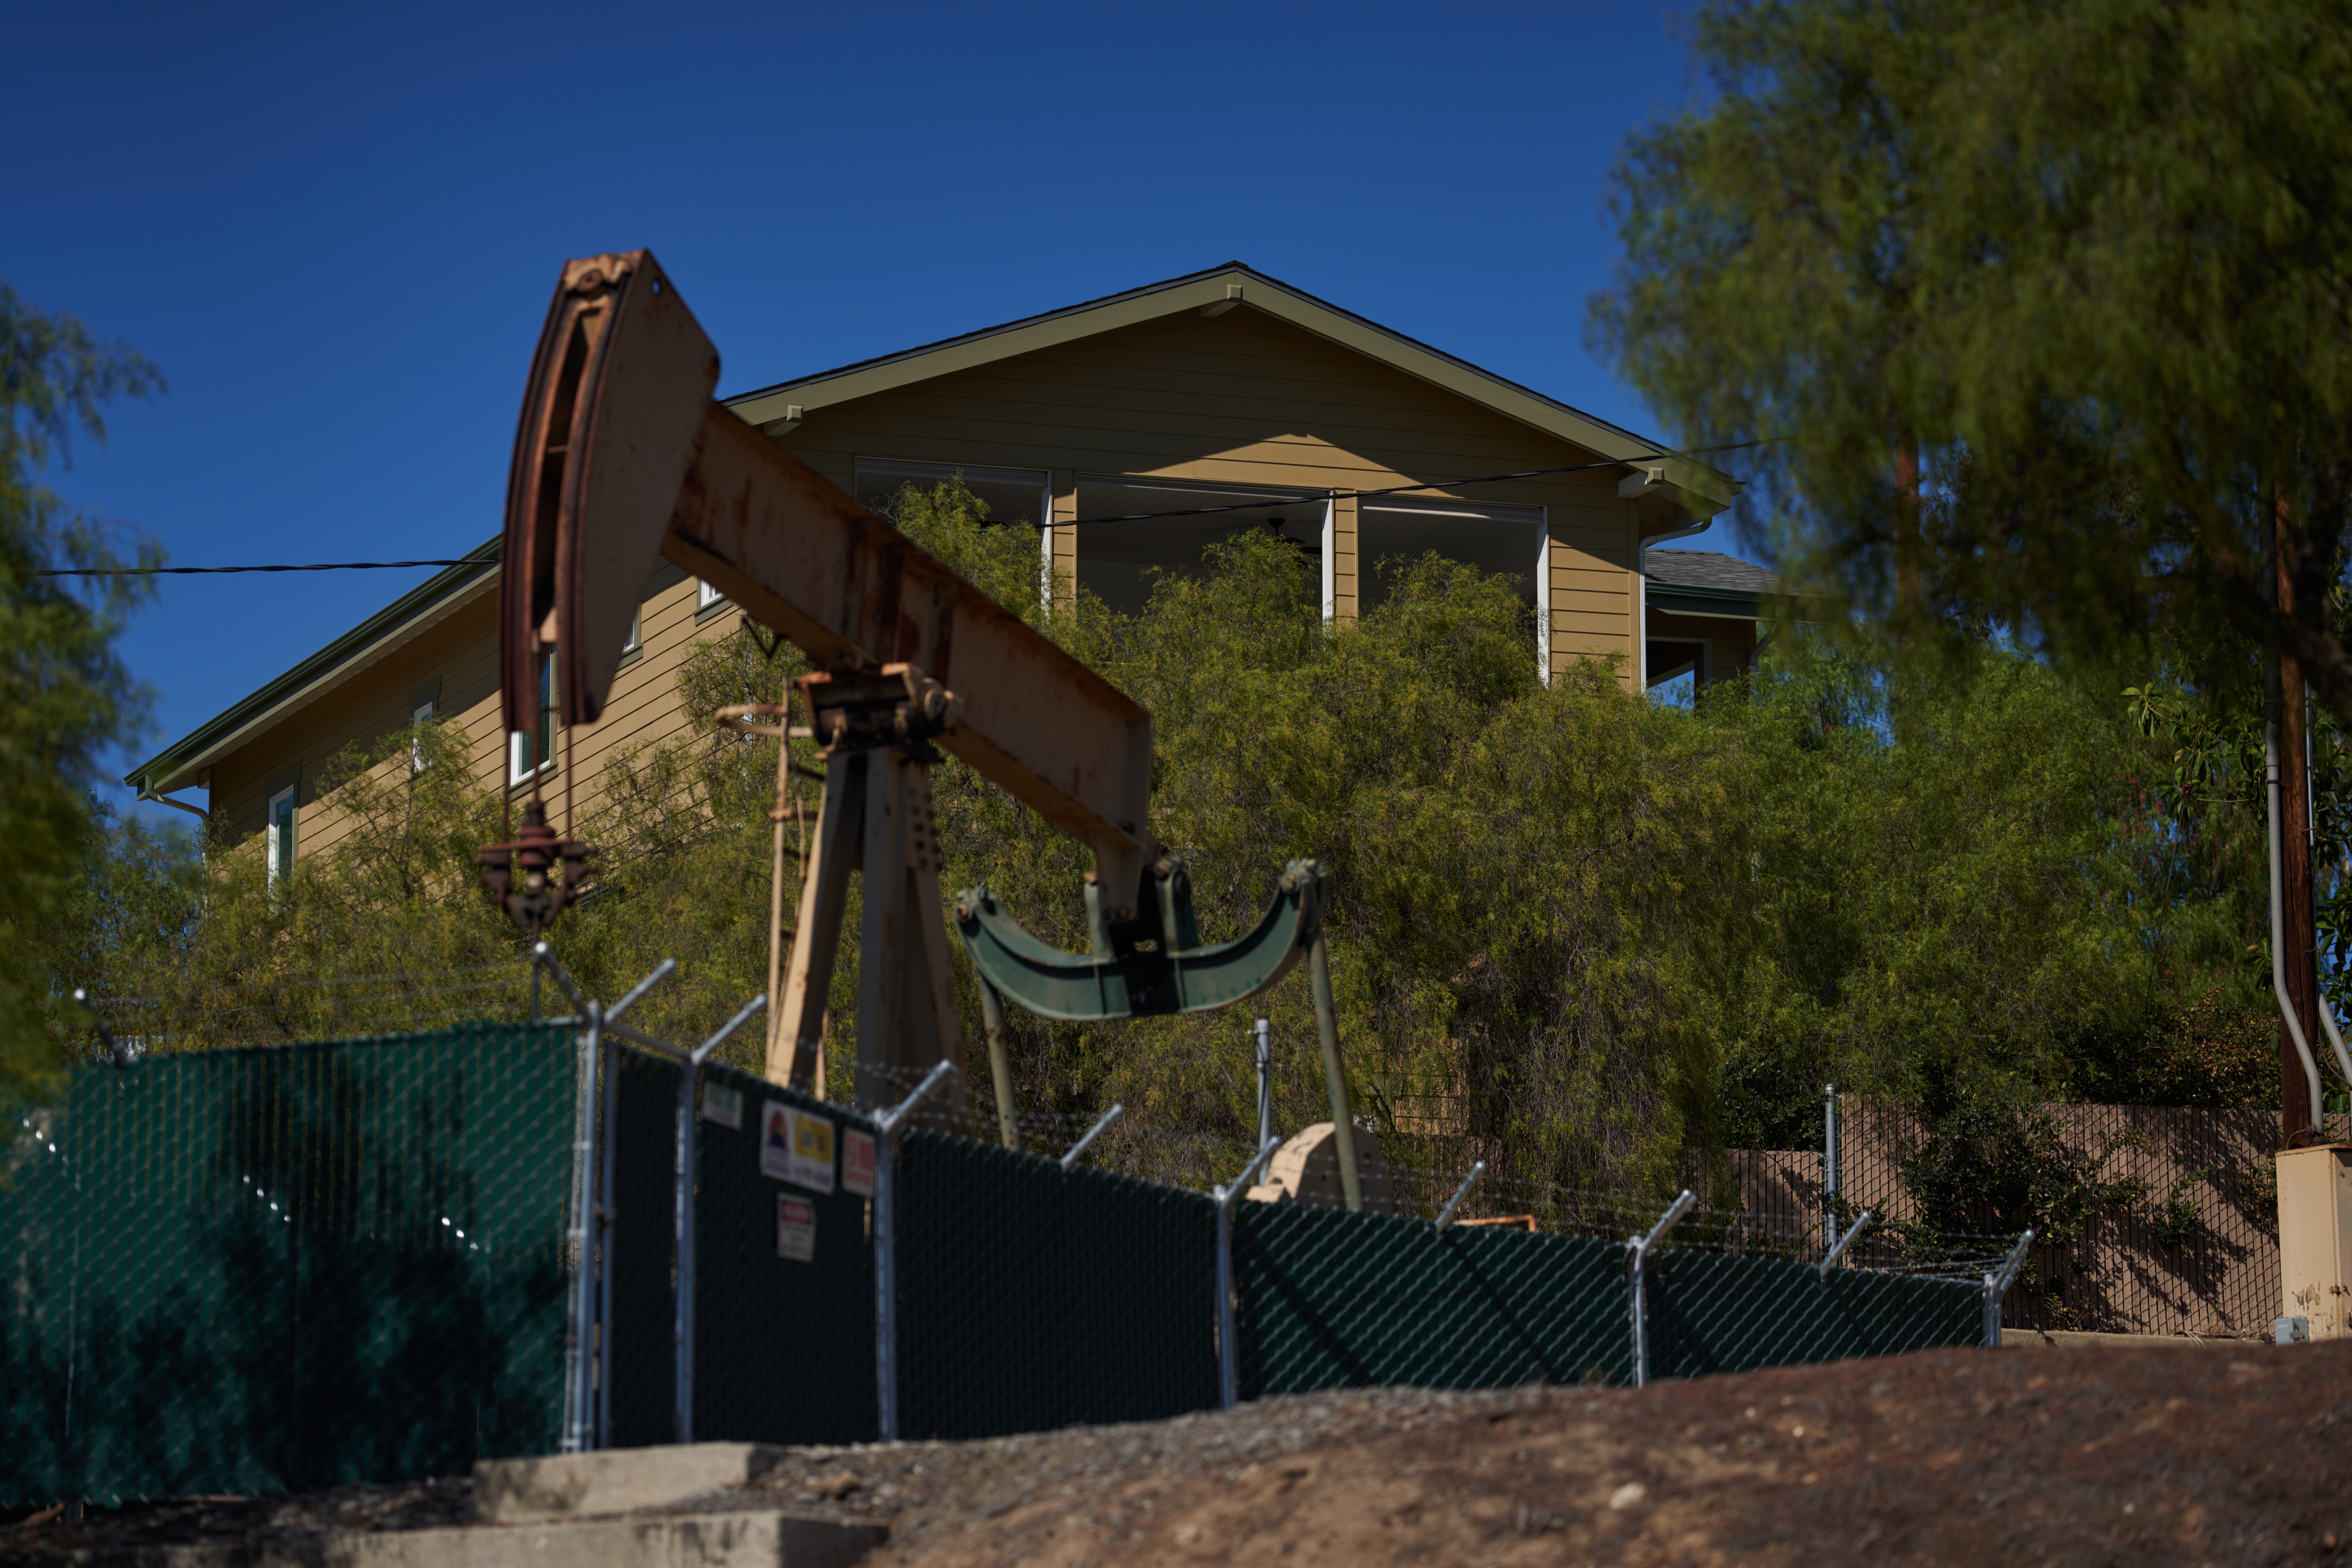 An active oil drilling rig is located next to a single family home on Sept. 21, 2022 in Signal Hill, California. Credit: Allison Dinner/Getty Images